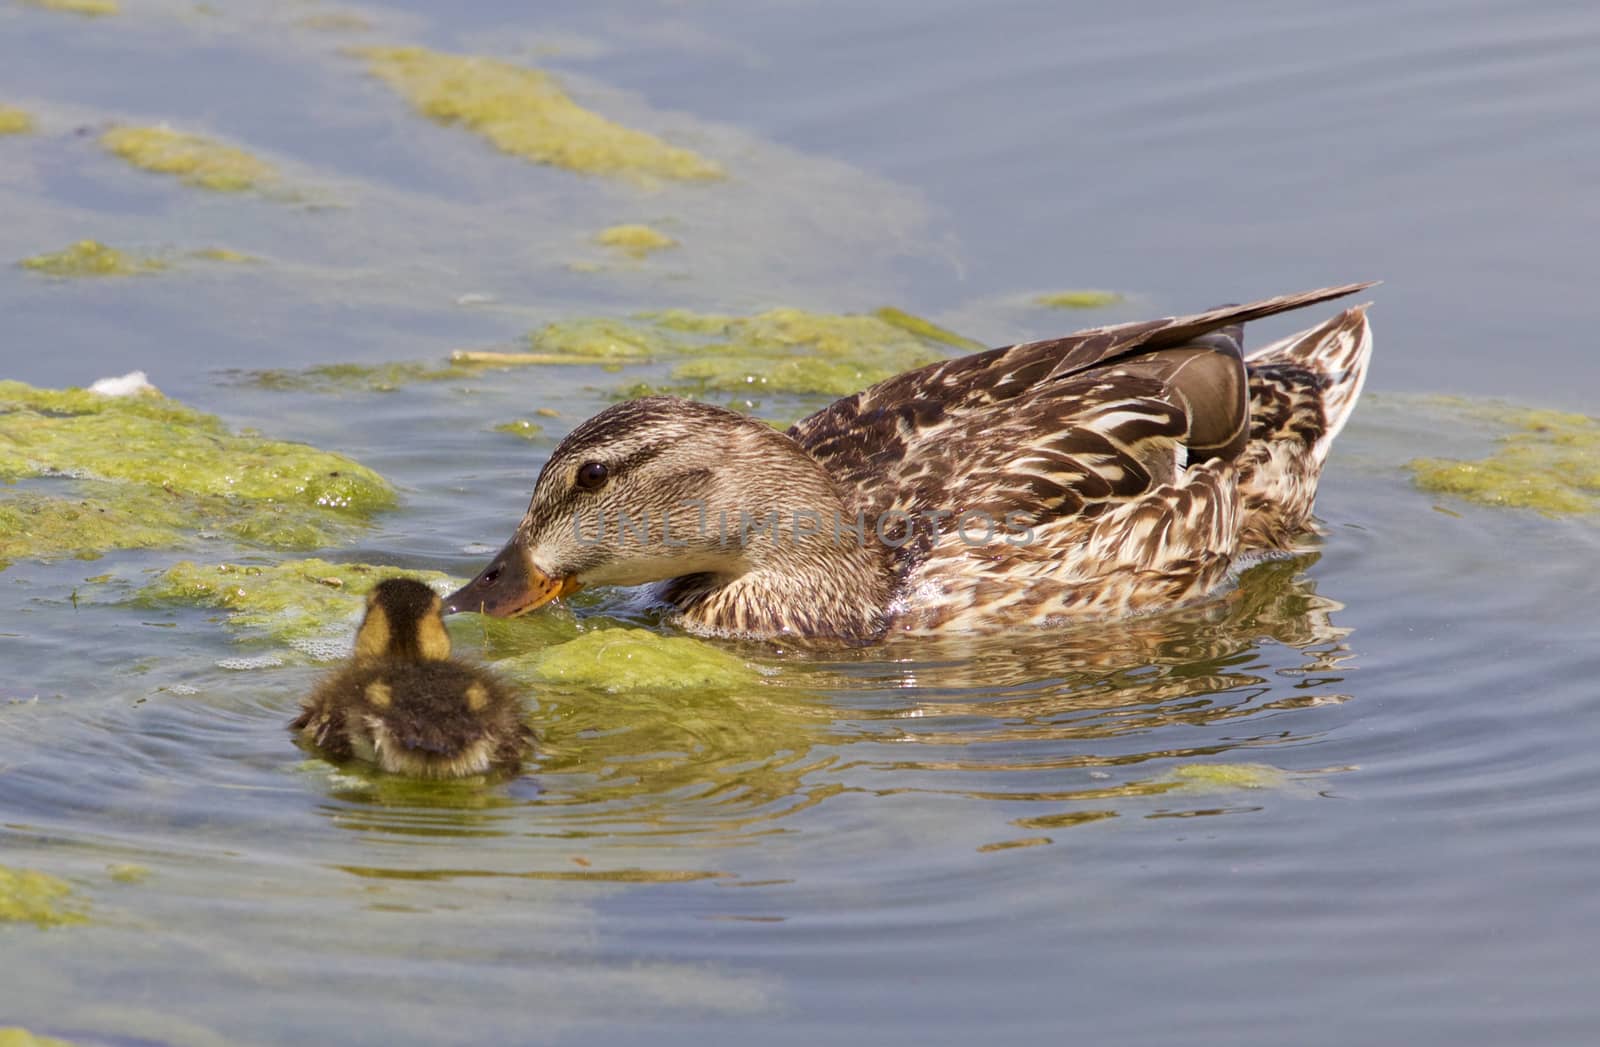 The mother-duck and her chick together